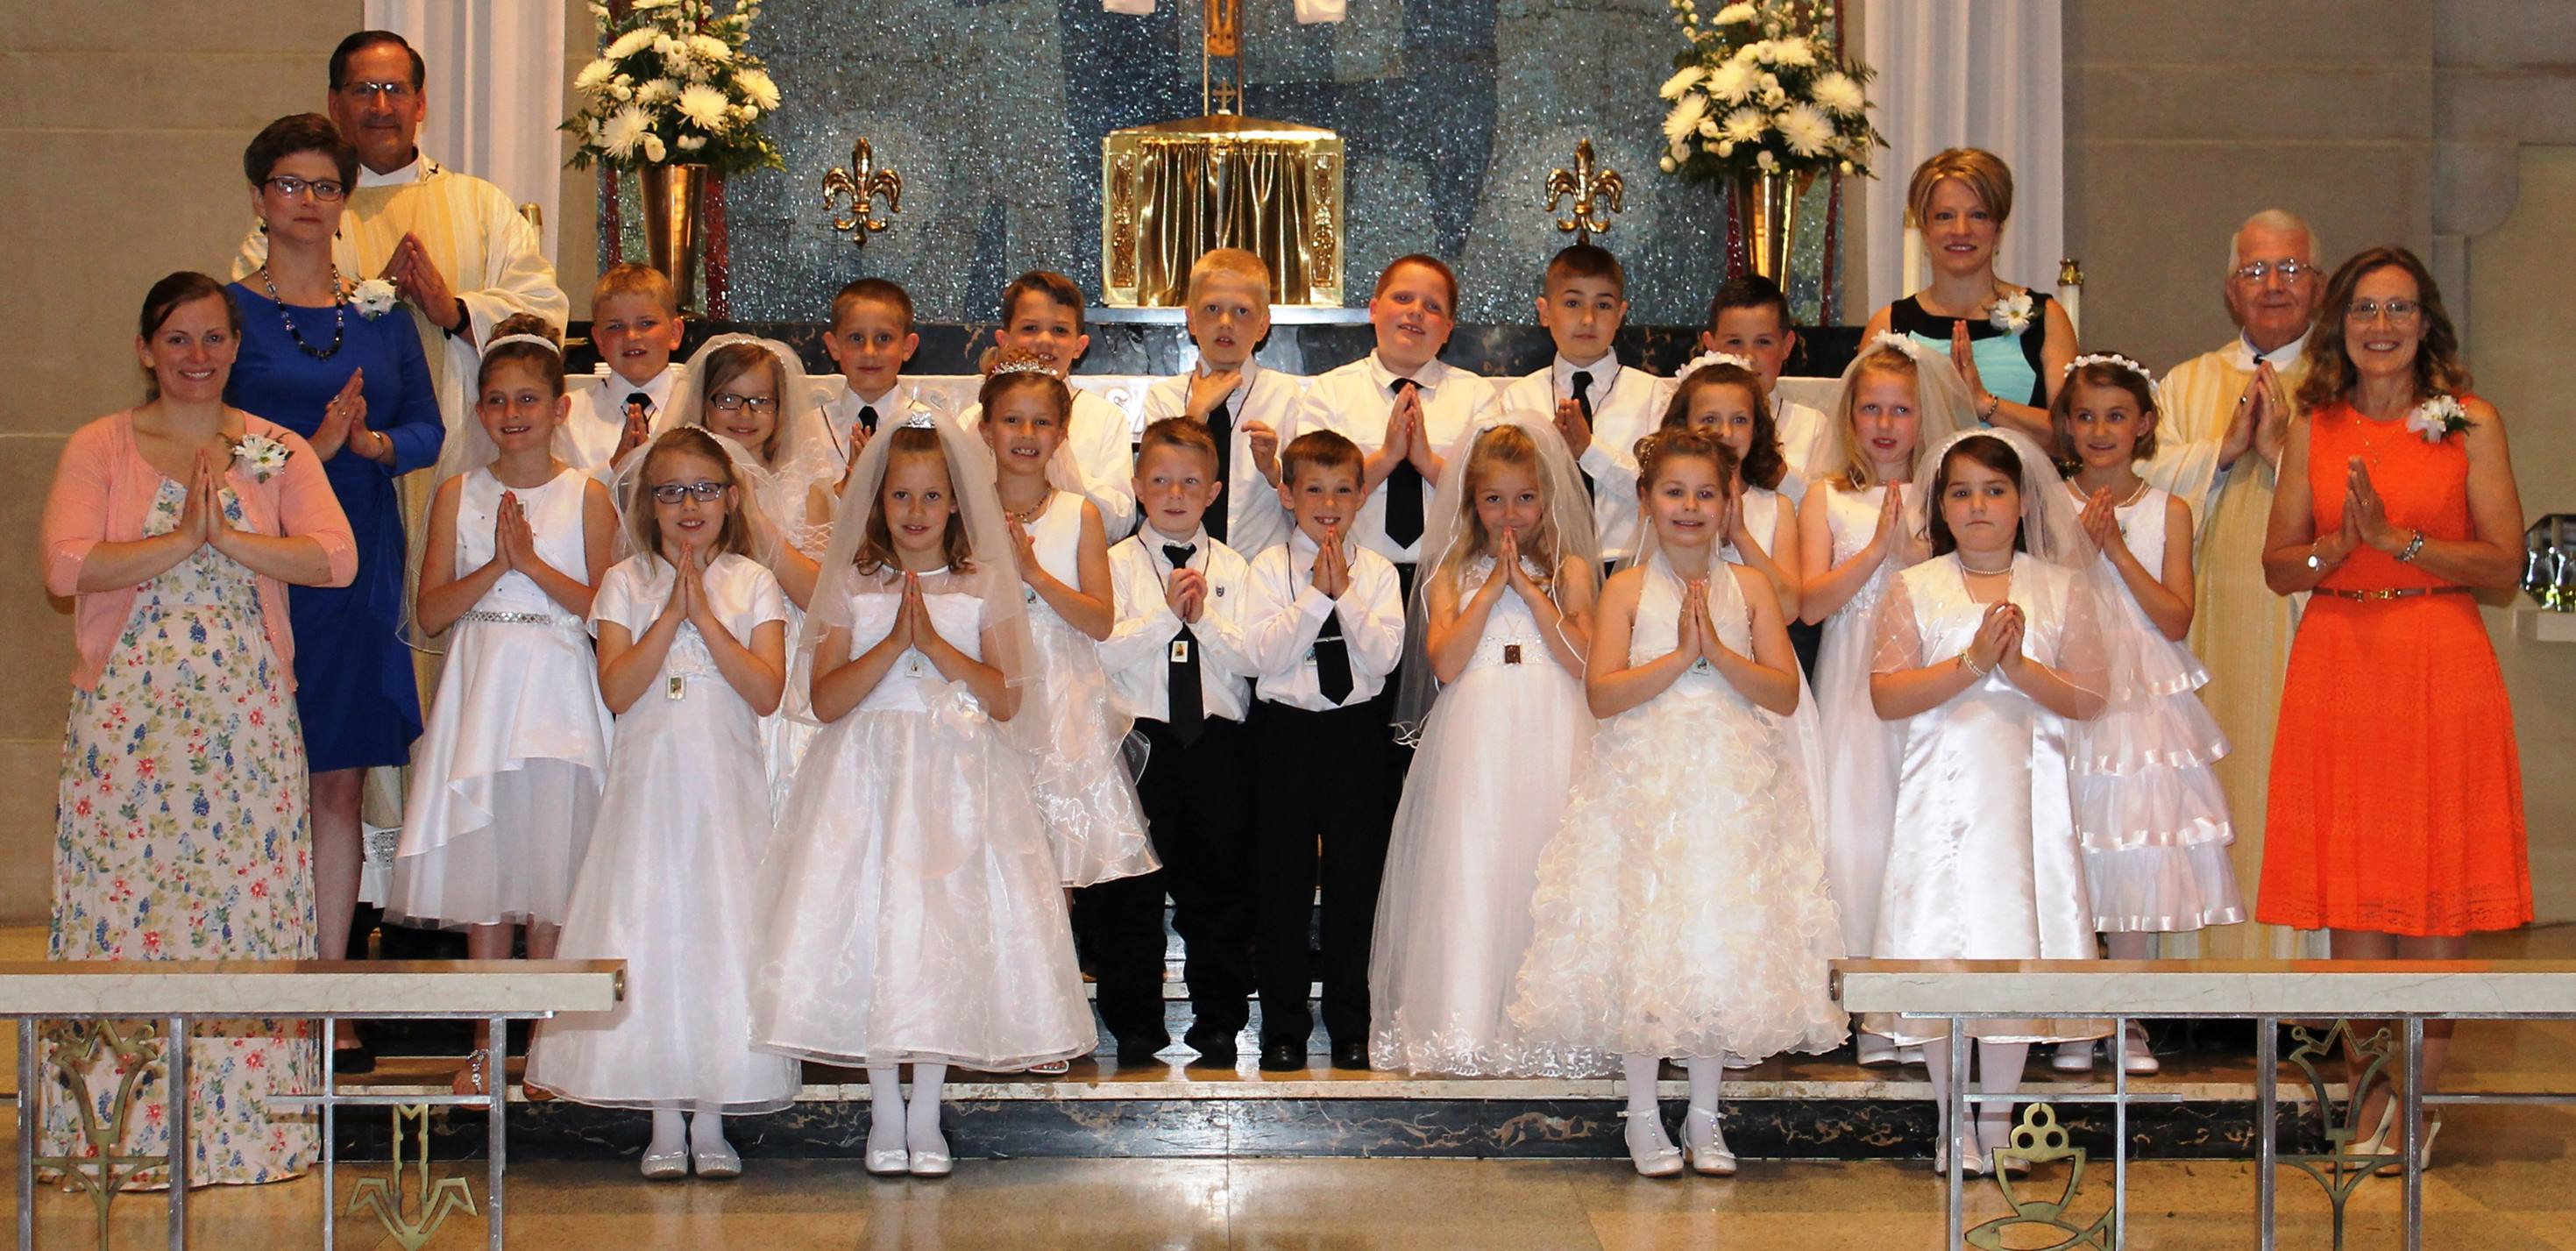 just first communion